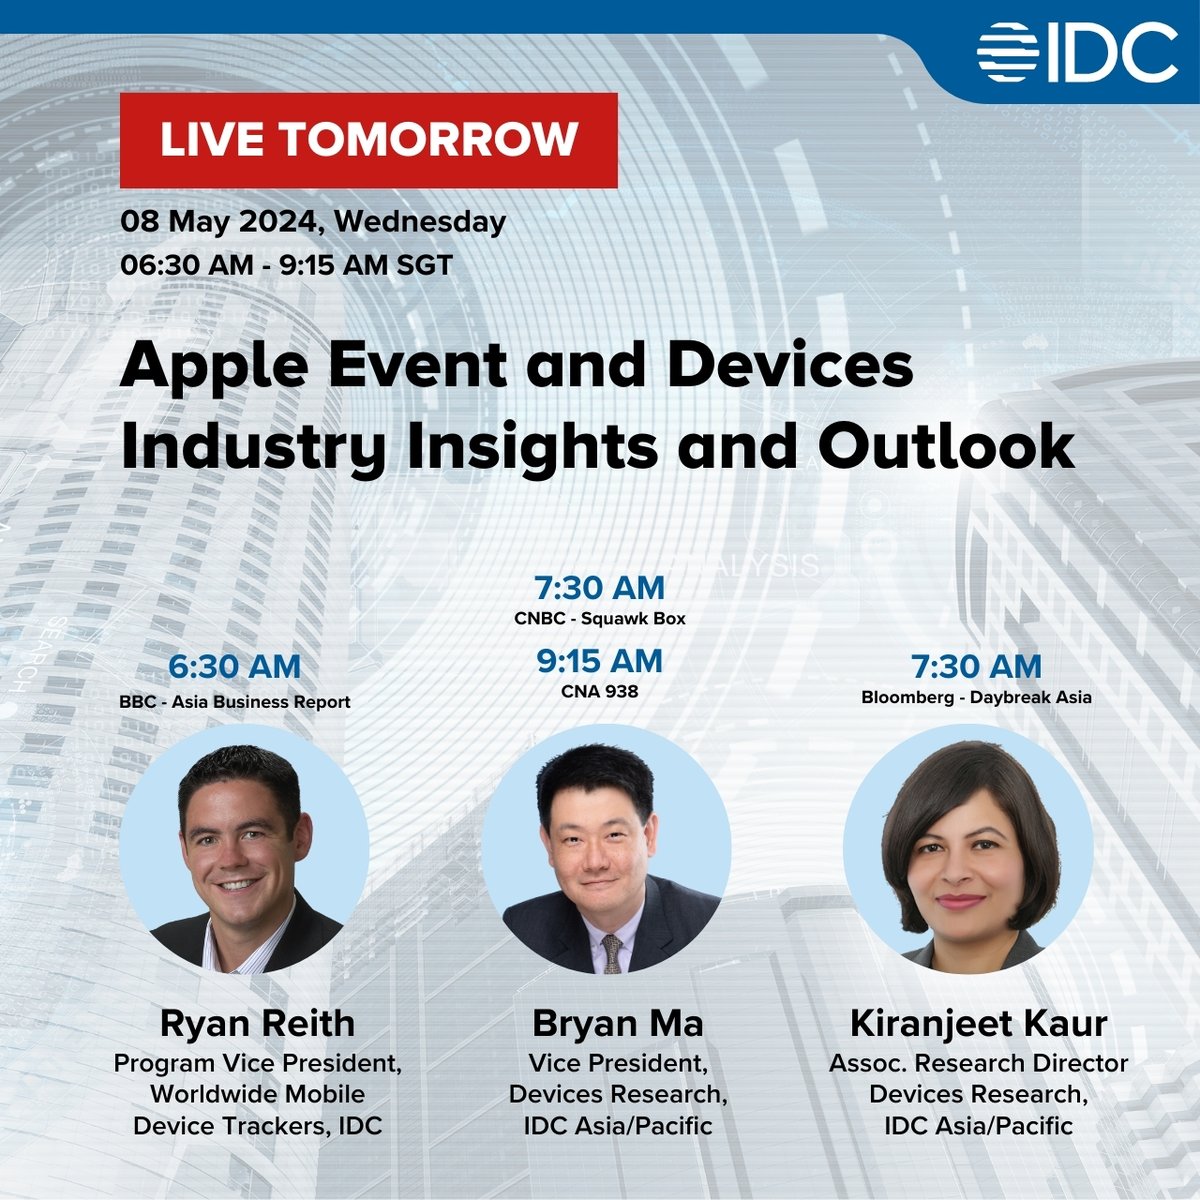 🔴 LIVE TOMORROW - Wednesday, 08 May (SGT) 📺 Tune in as IDC's top analysts lead the conversation on the latest in tech at the Apple event. 🎥 Ryan Reith on BBC - Asia Business Report at 6:30 AM Bryan Ma on CNBC - Squawk Box at 7:30 AM, and CNA 938 at 9:15 AM Kiranjeet…